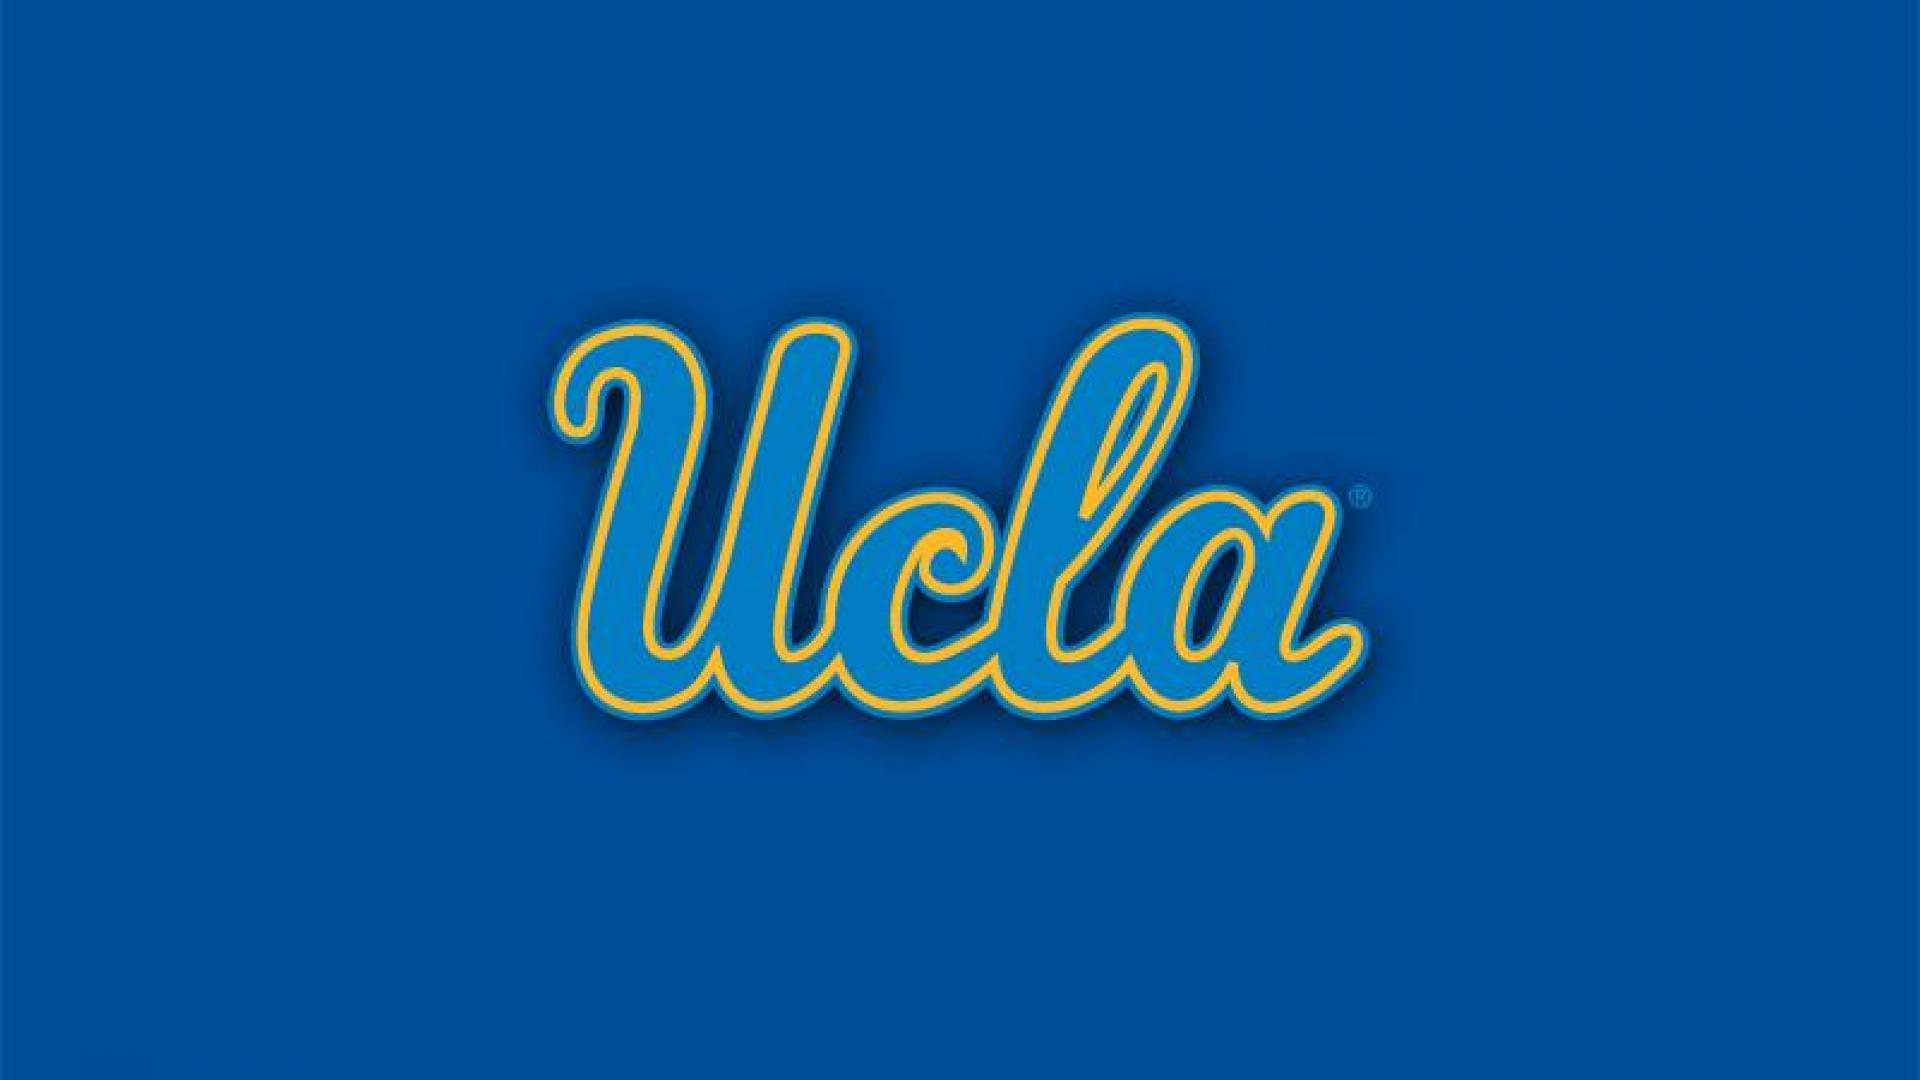 Ucla High Quality And Resolution Wallpaper On Hqwallbase